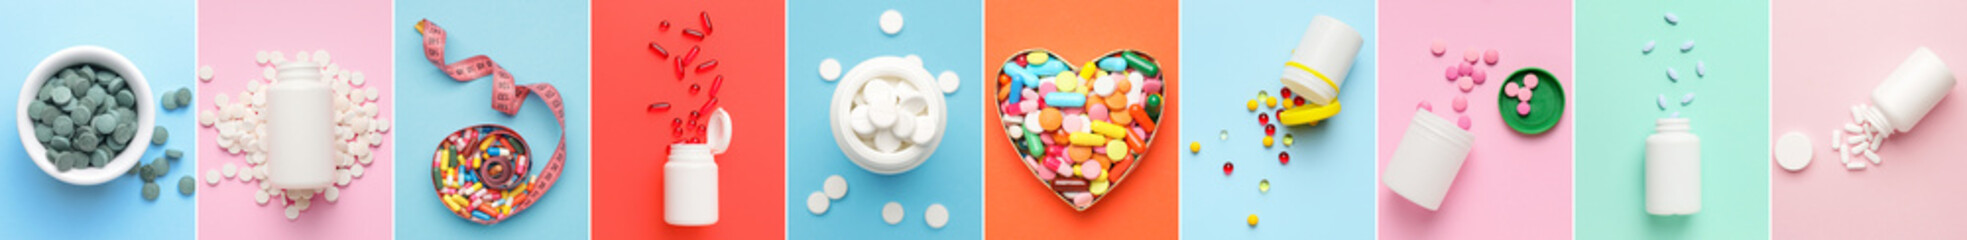 Collage with different pills on colorful background